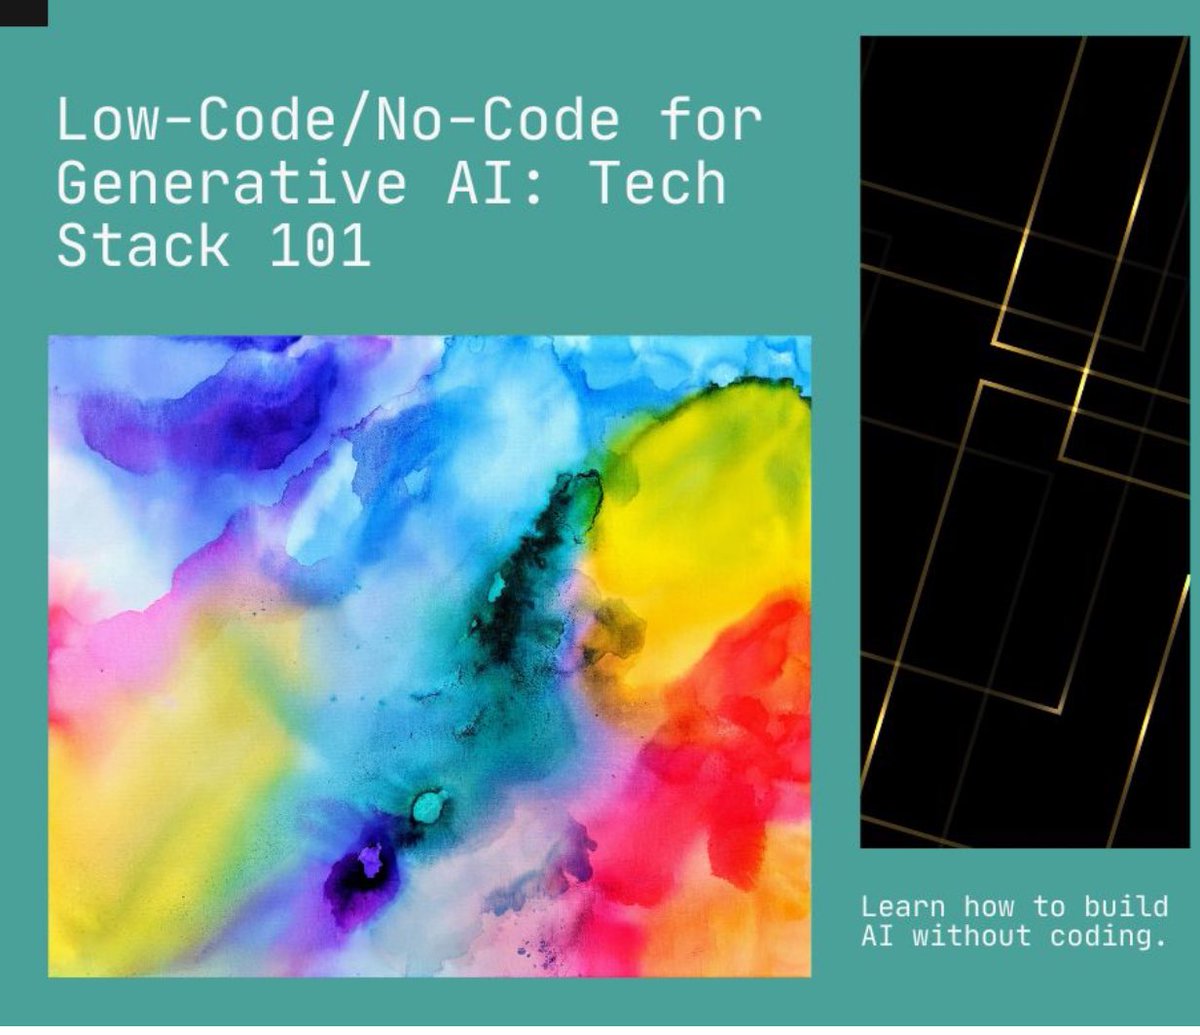 Low-Code/No-Code Tech Stack for Generative AI. Read the overview in the comments section. 
Share your experience and learnings in the comments on this topic.
#generativeai #techstack #productmanagement